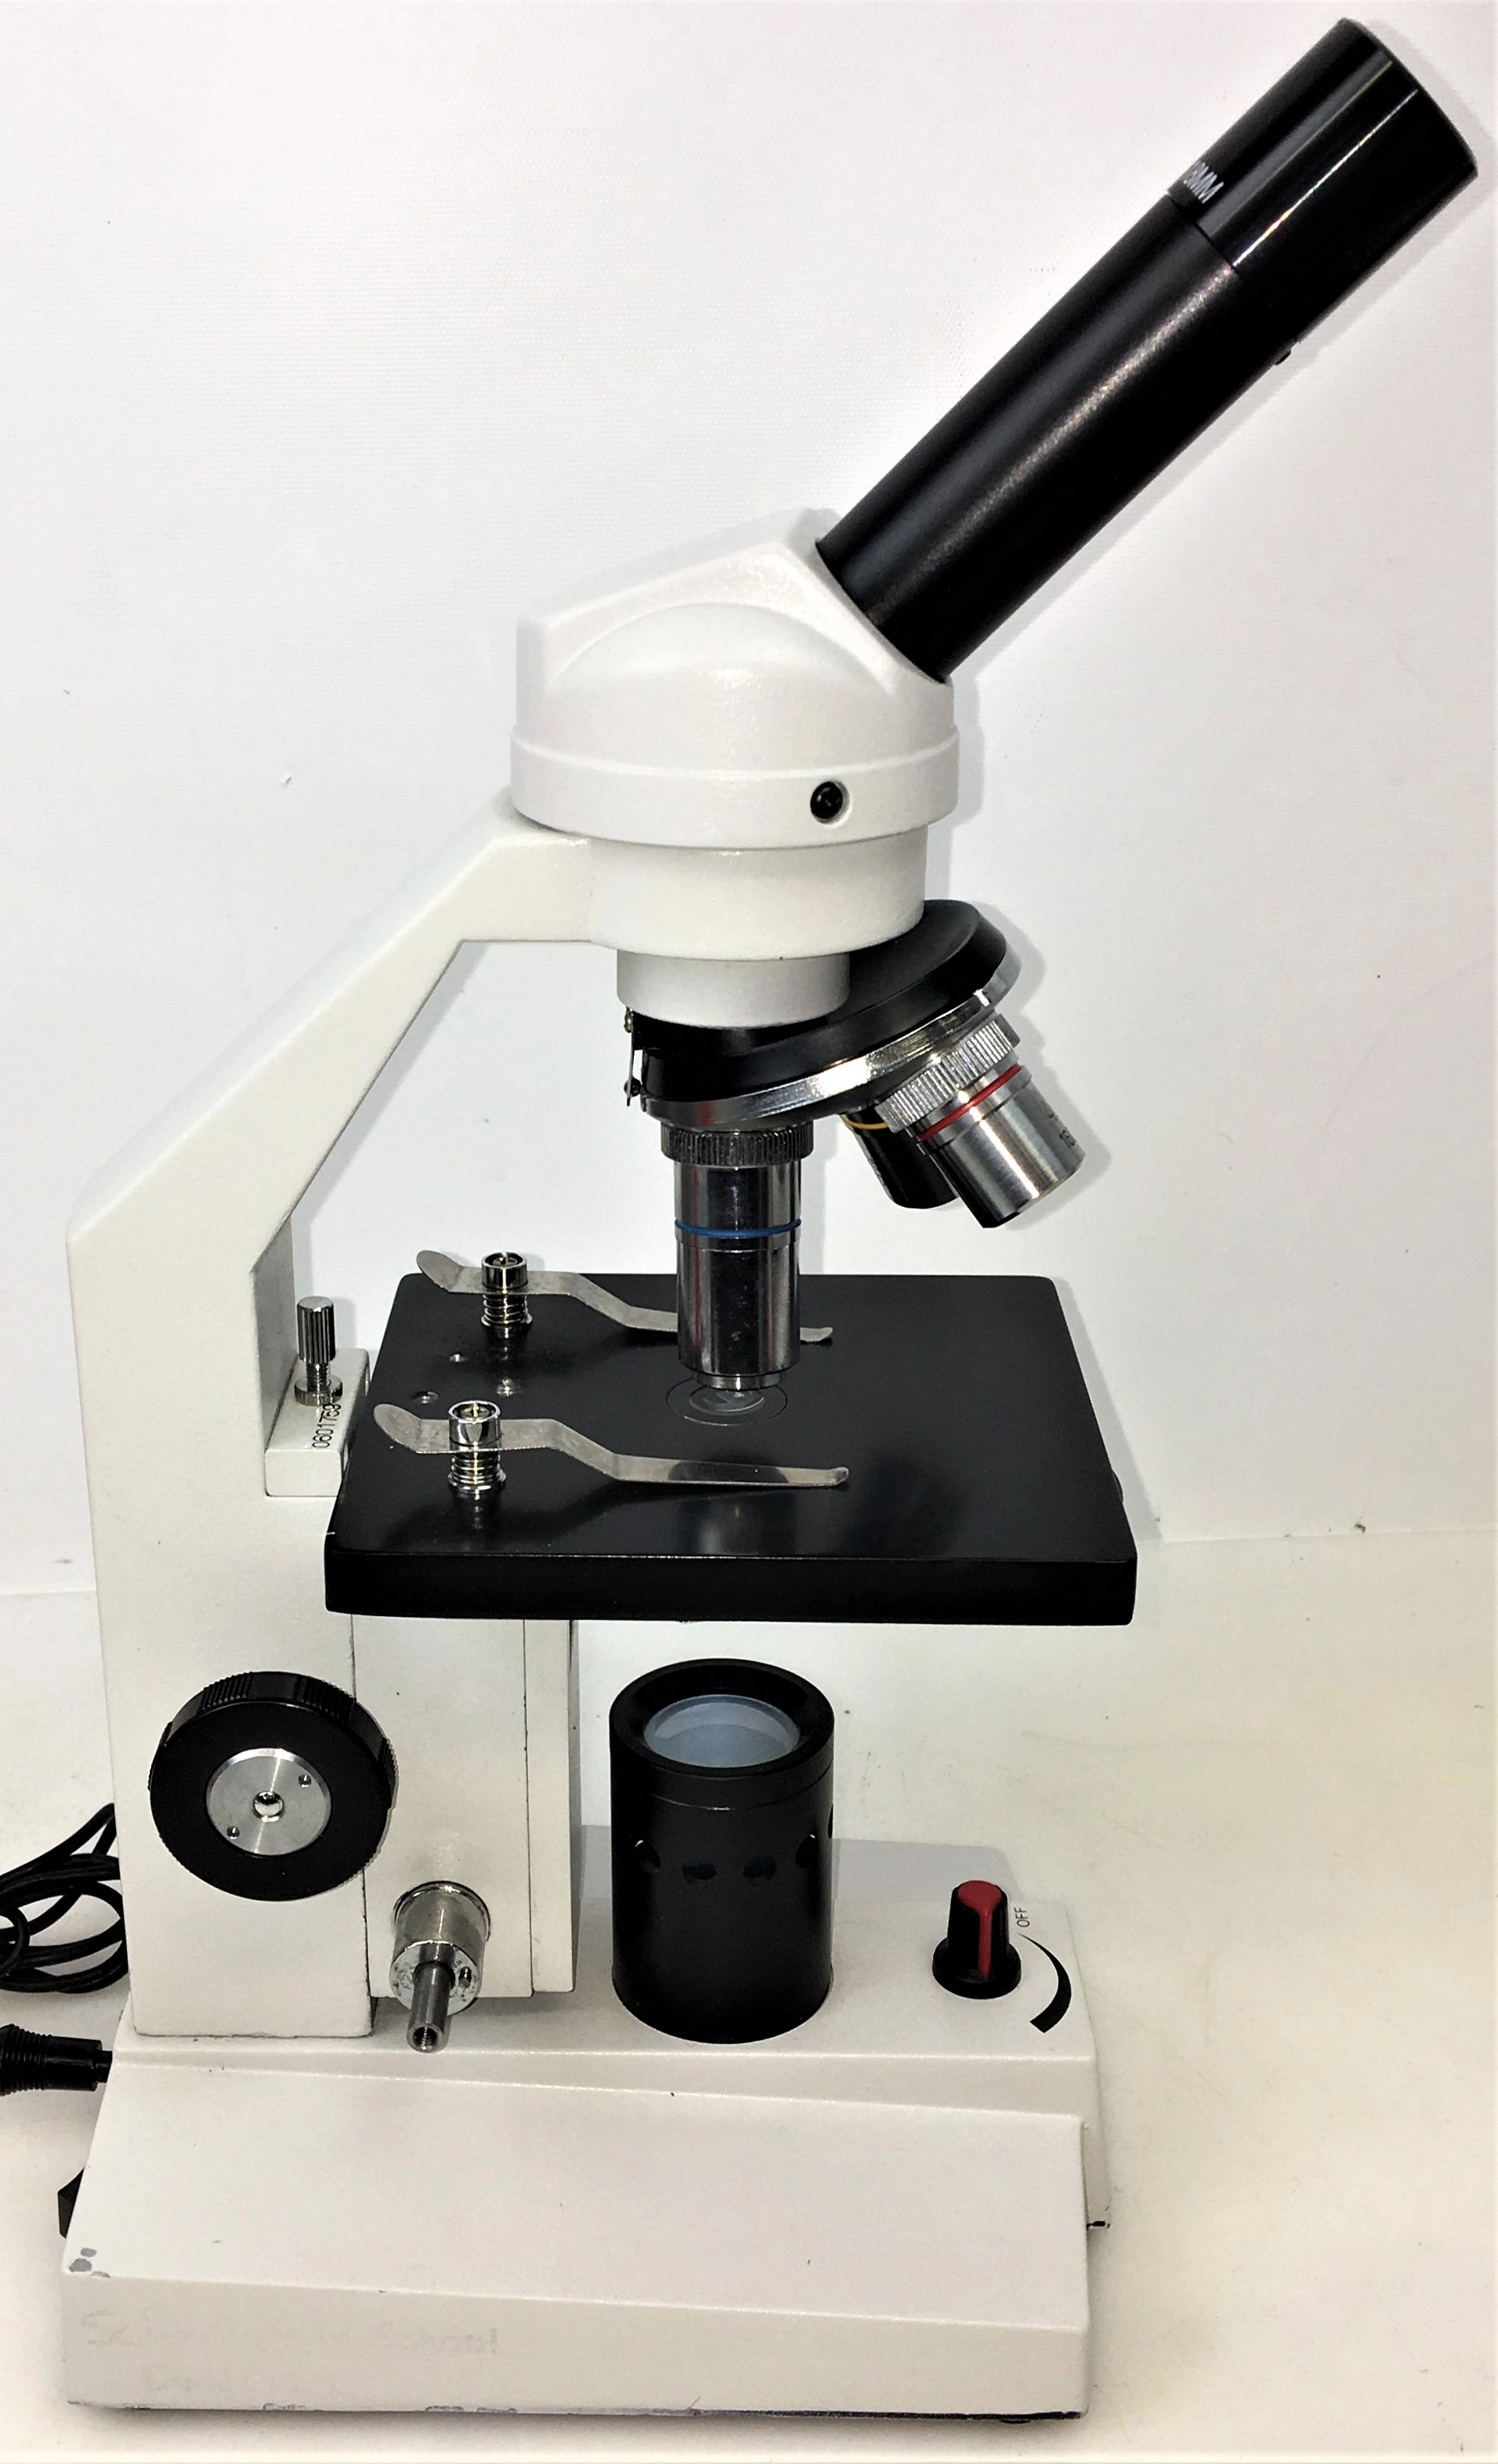 ProLab Q-1280-050 Cordless Rechargeable Monocular Microscope - 40X to 400X